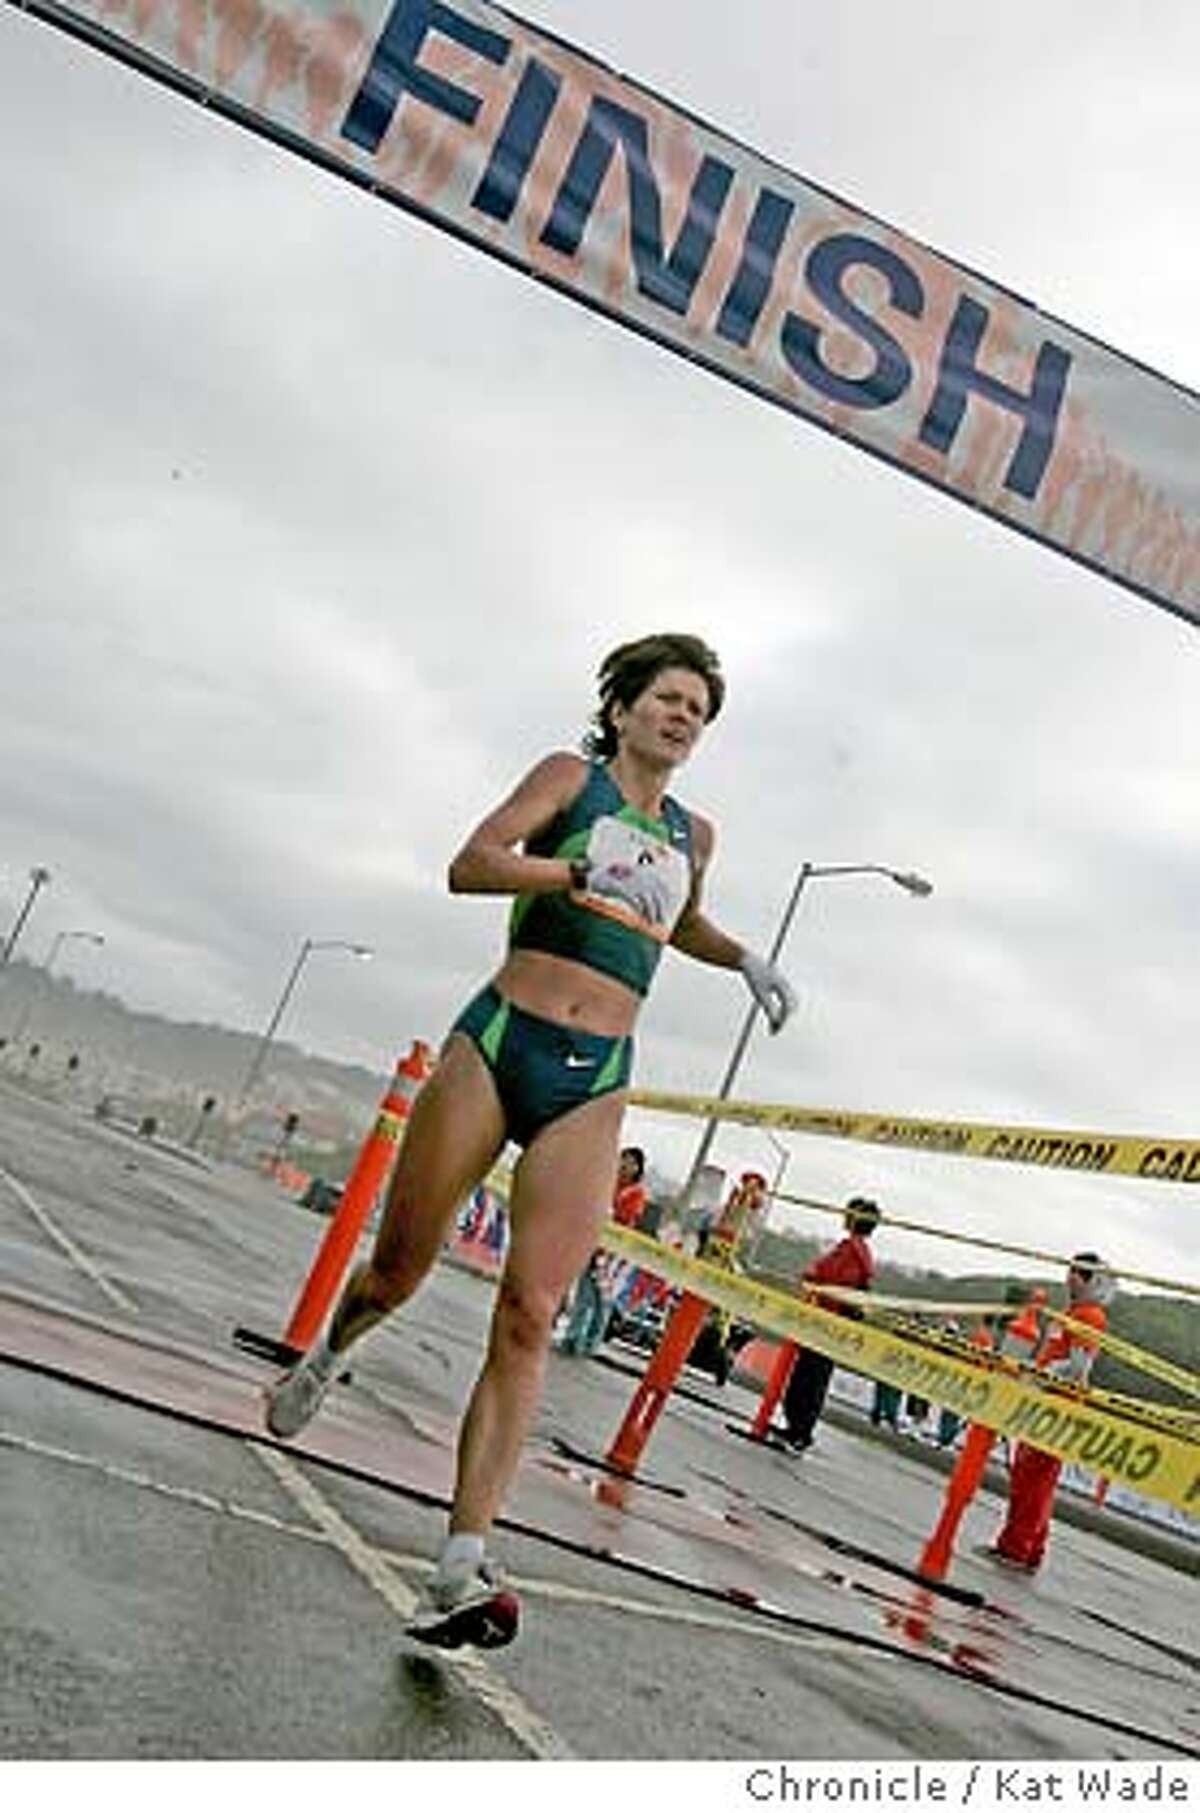 The defending champion, Tetyana Hladyr, 31, from the Ukraine is the first female across the finish line on the Great Highway at Ocean Beach about 35 minutes after the start of the 95th Annual Bay to Breakers race Sunday May 21, 2006. (Kat Wade/The Chronicle) ** Tetyana Hladyr cq